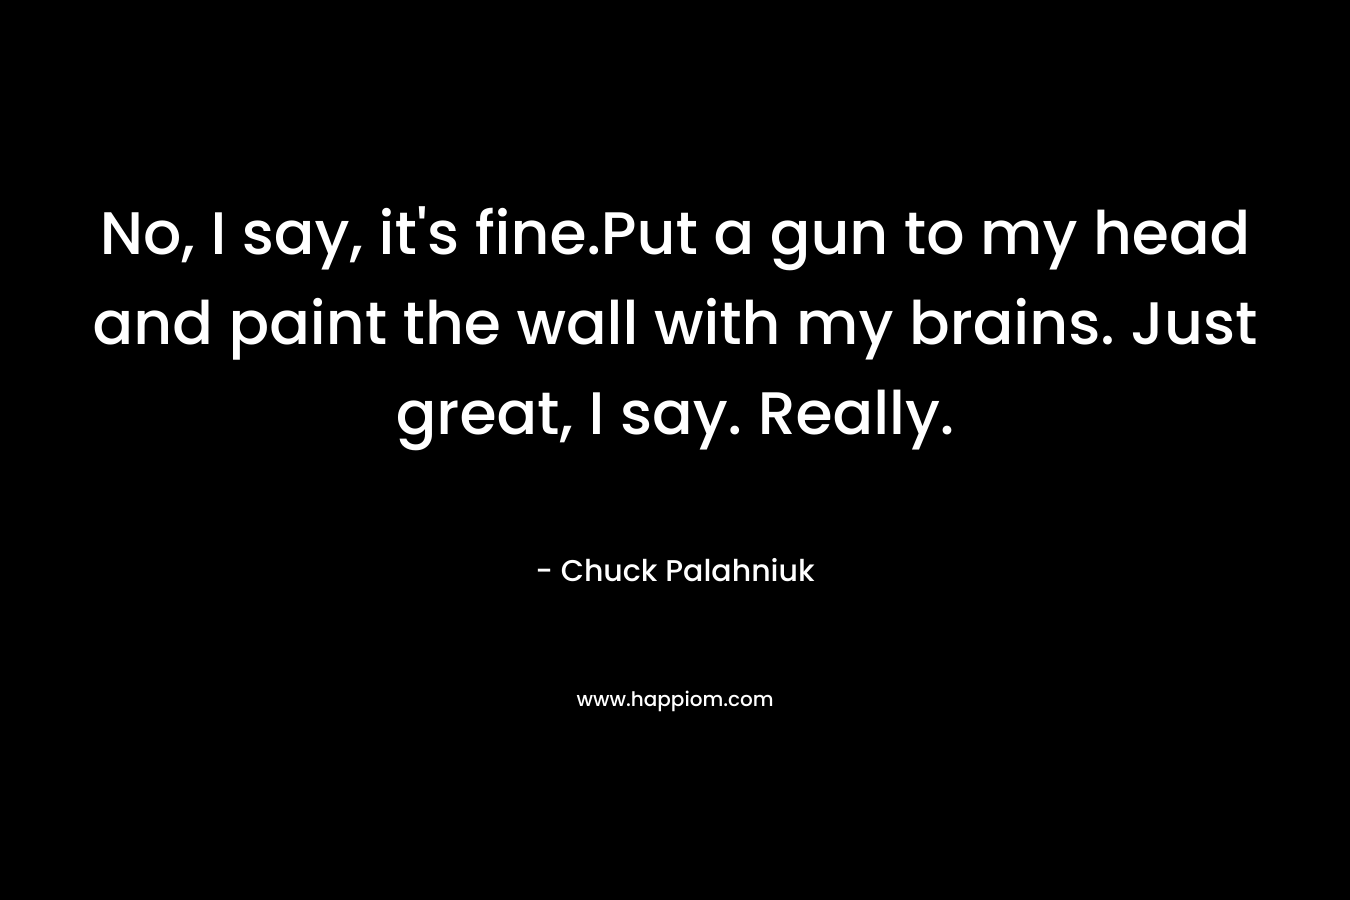 No, I say, it's fine.Put a gun to my head and paint the wall with my brains. Just great, I say. Really.